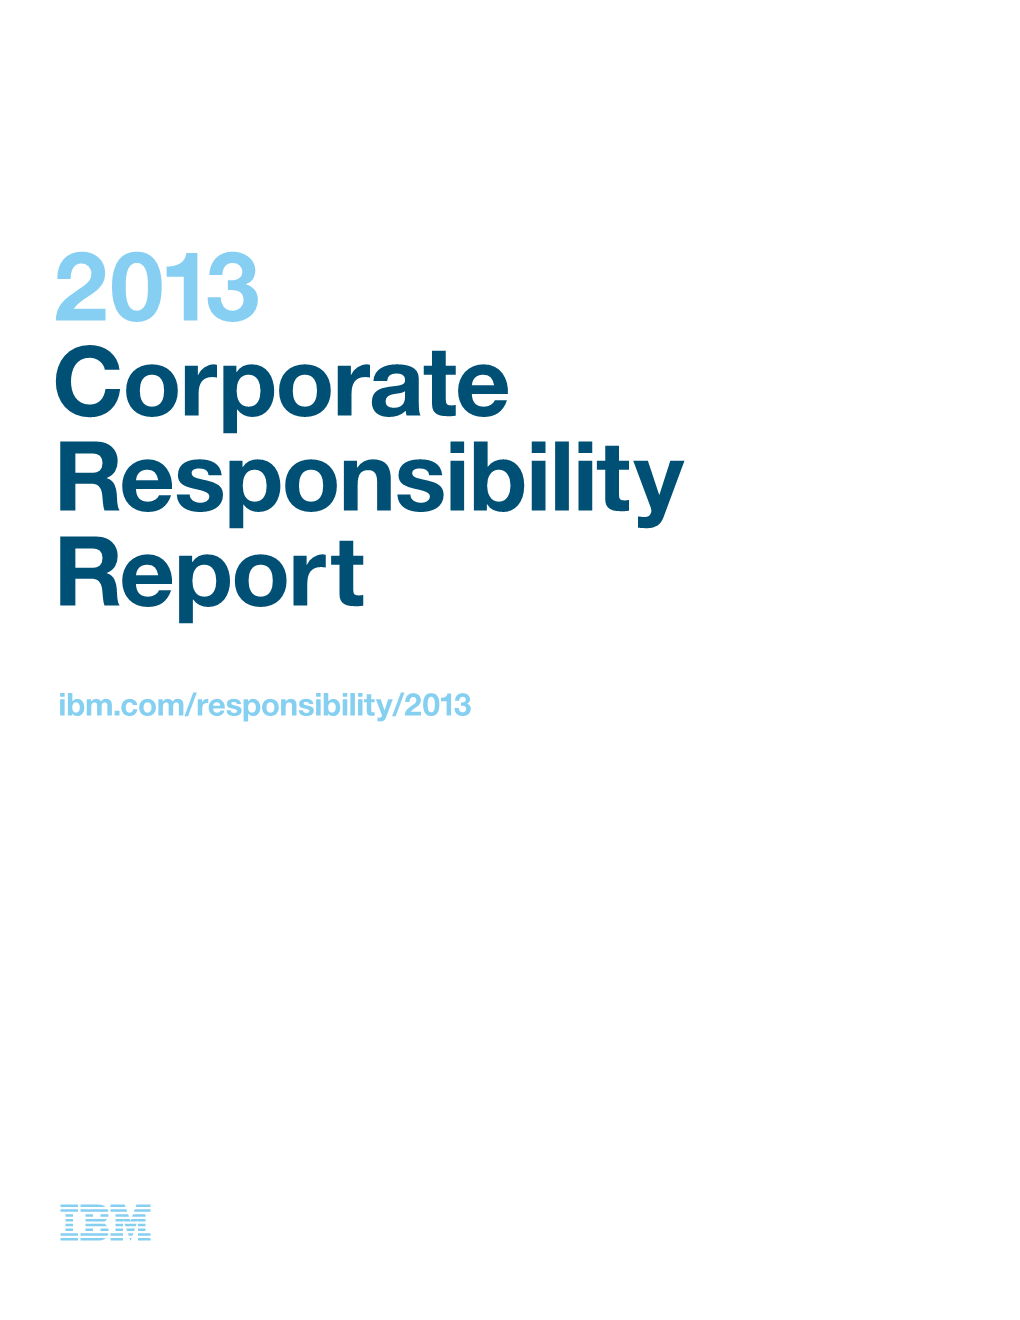 IBM 2013 Corporate Responsibility Report 2 at a Glance